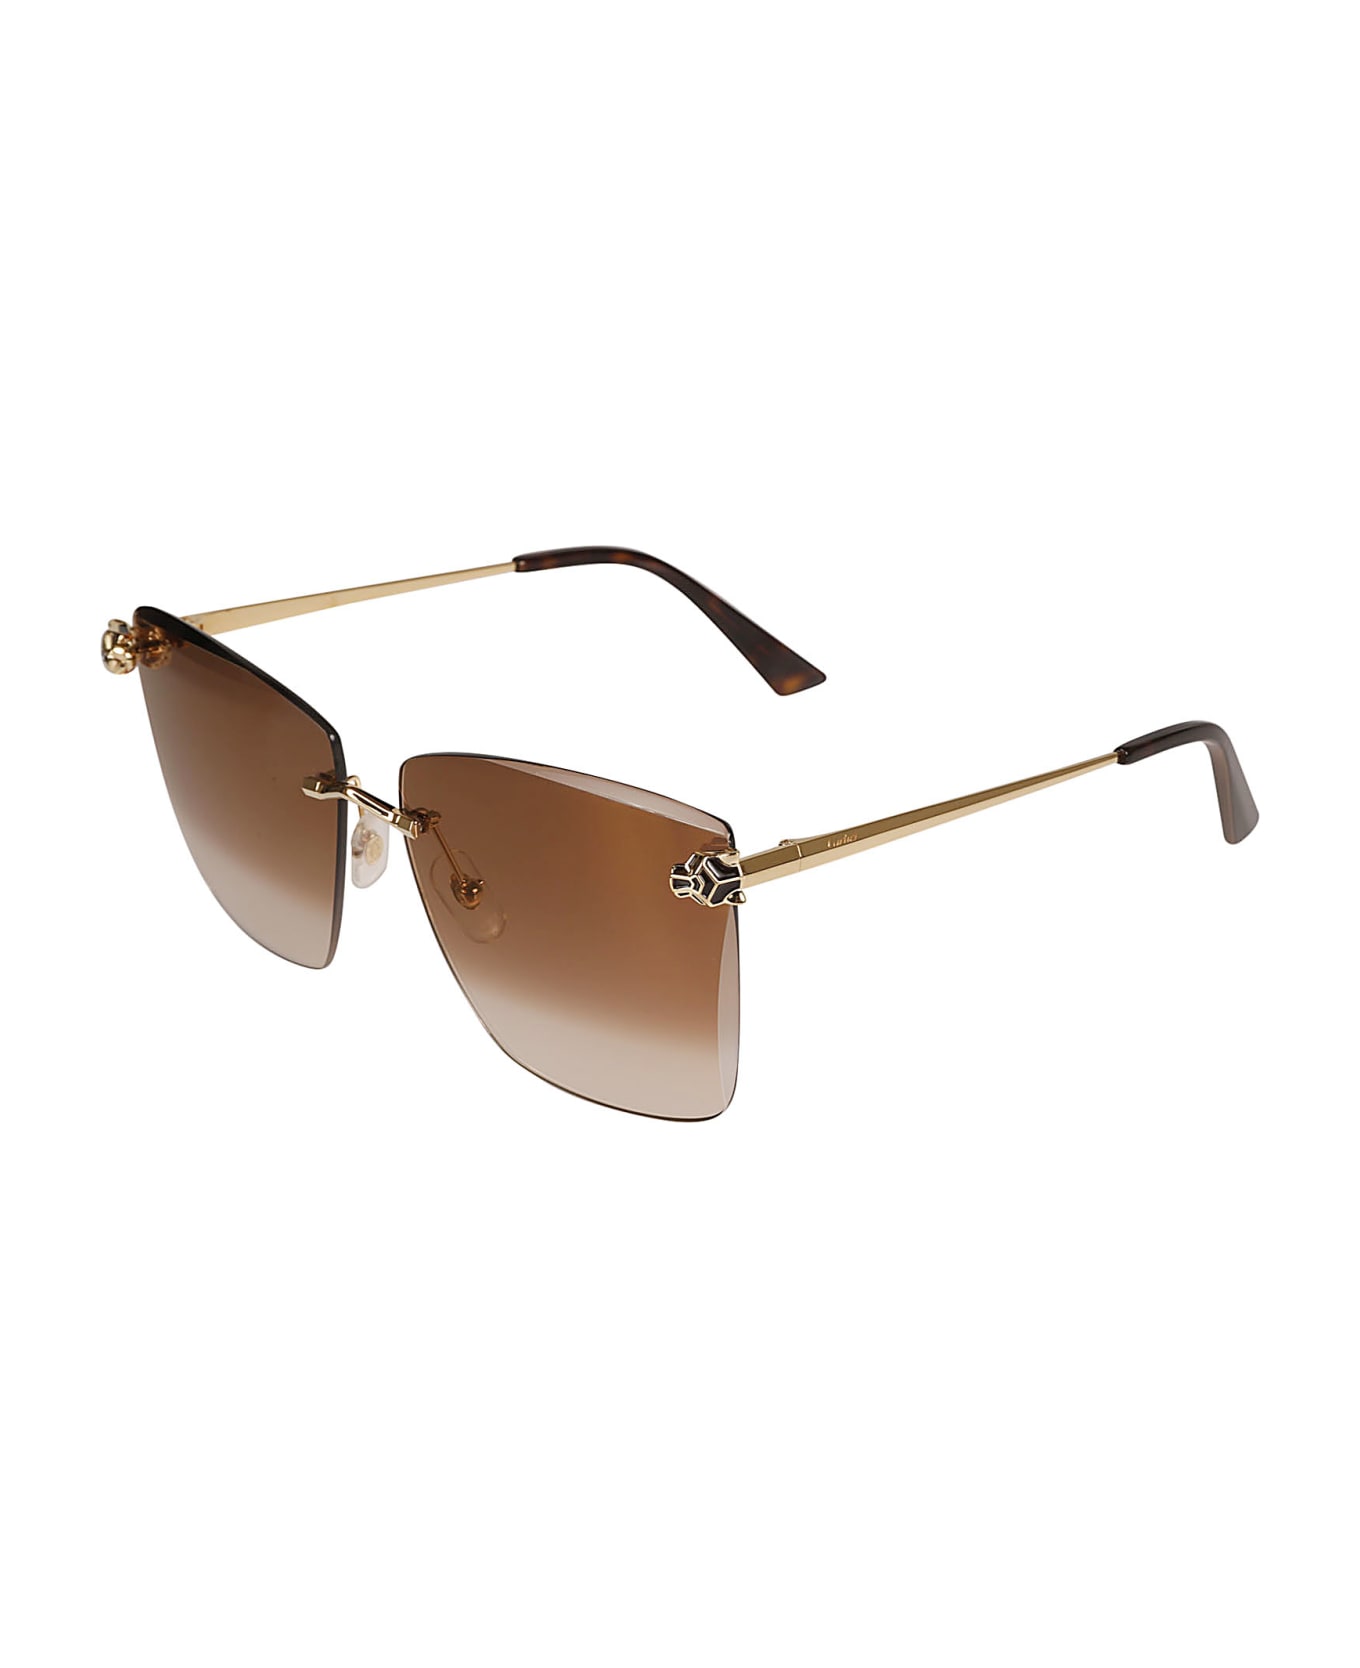 Cartier Eyewear Butterfly Square Sunglasses - Gold/Brown サングラス